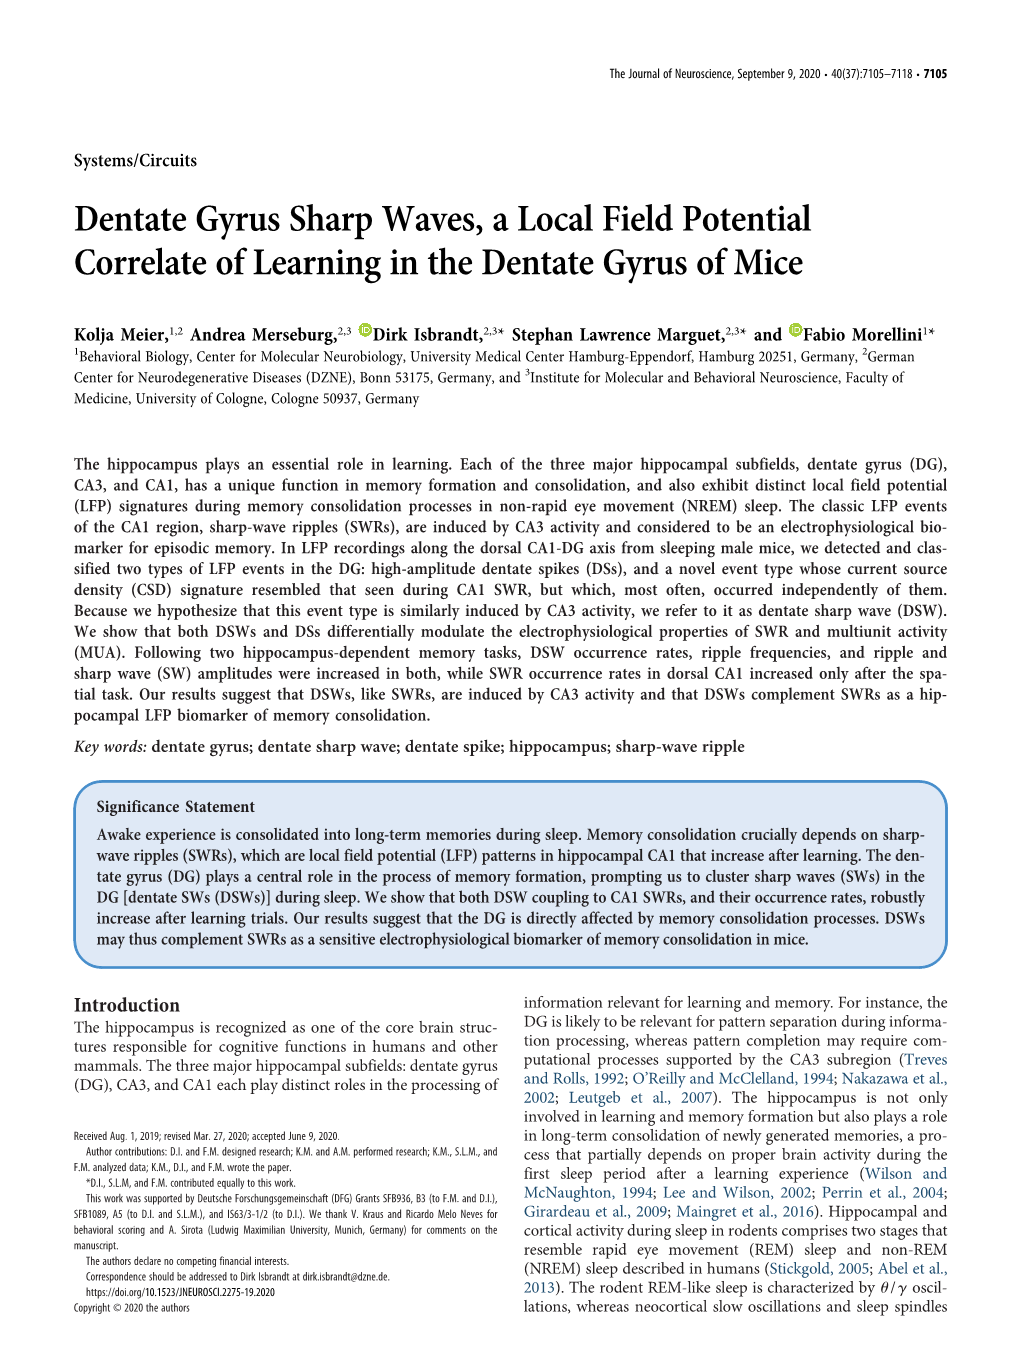 Dentate Gyrus Sharp Waves, a Local Field Potential Correlate of Learning in the Dentate Gyrus of Mice